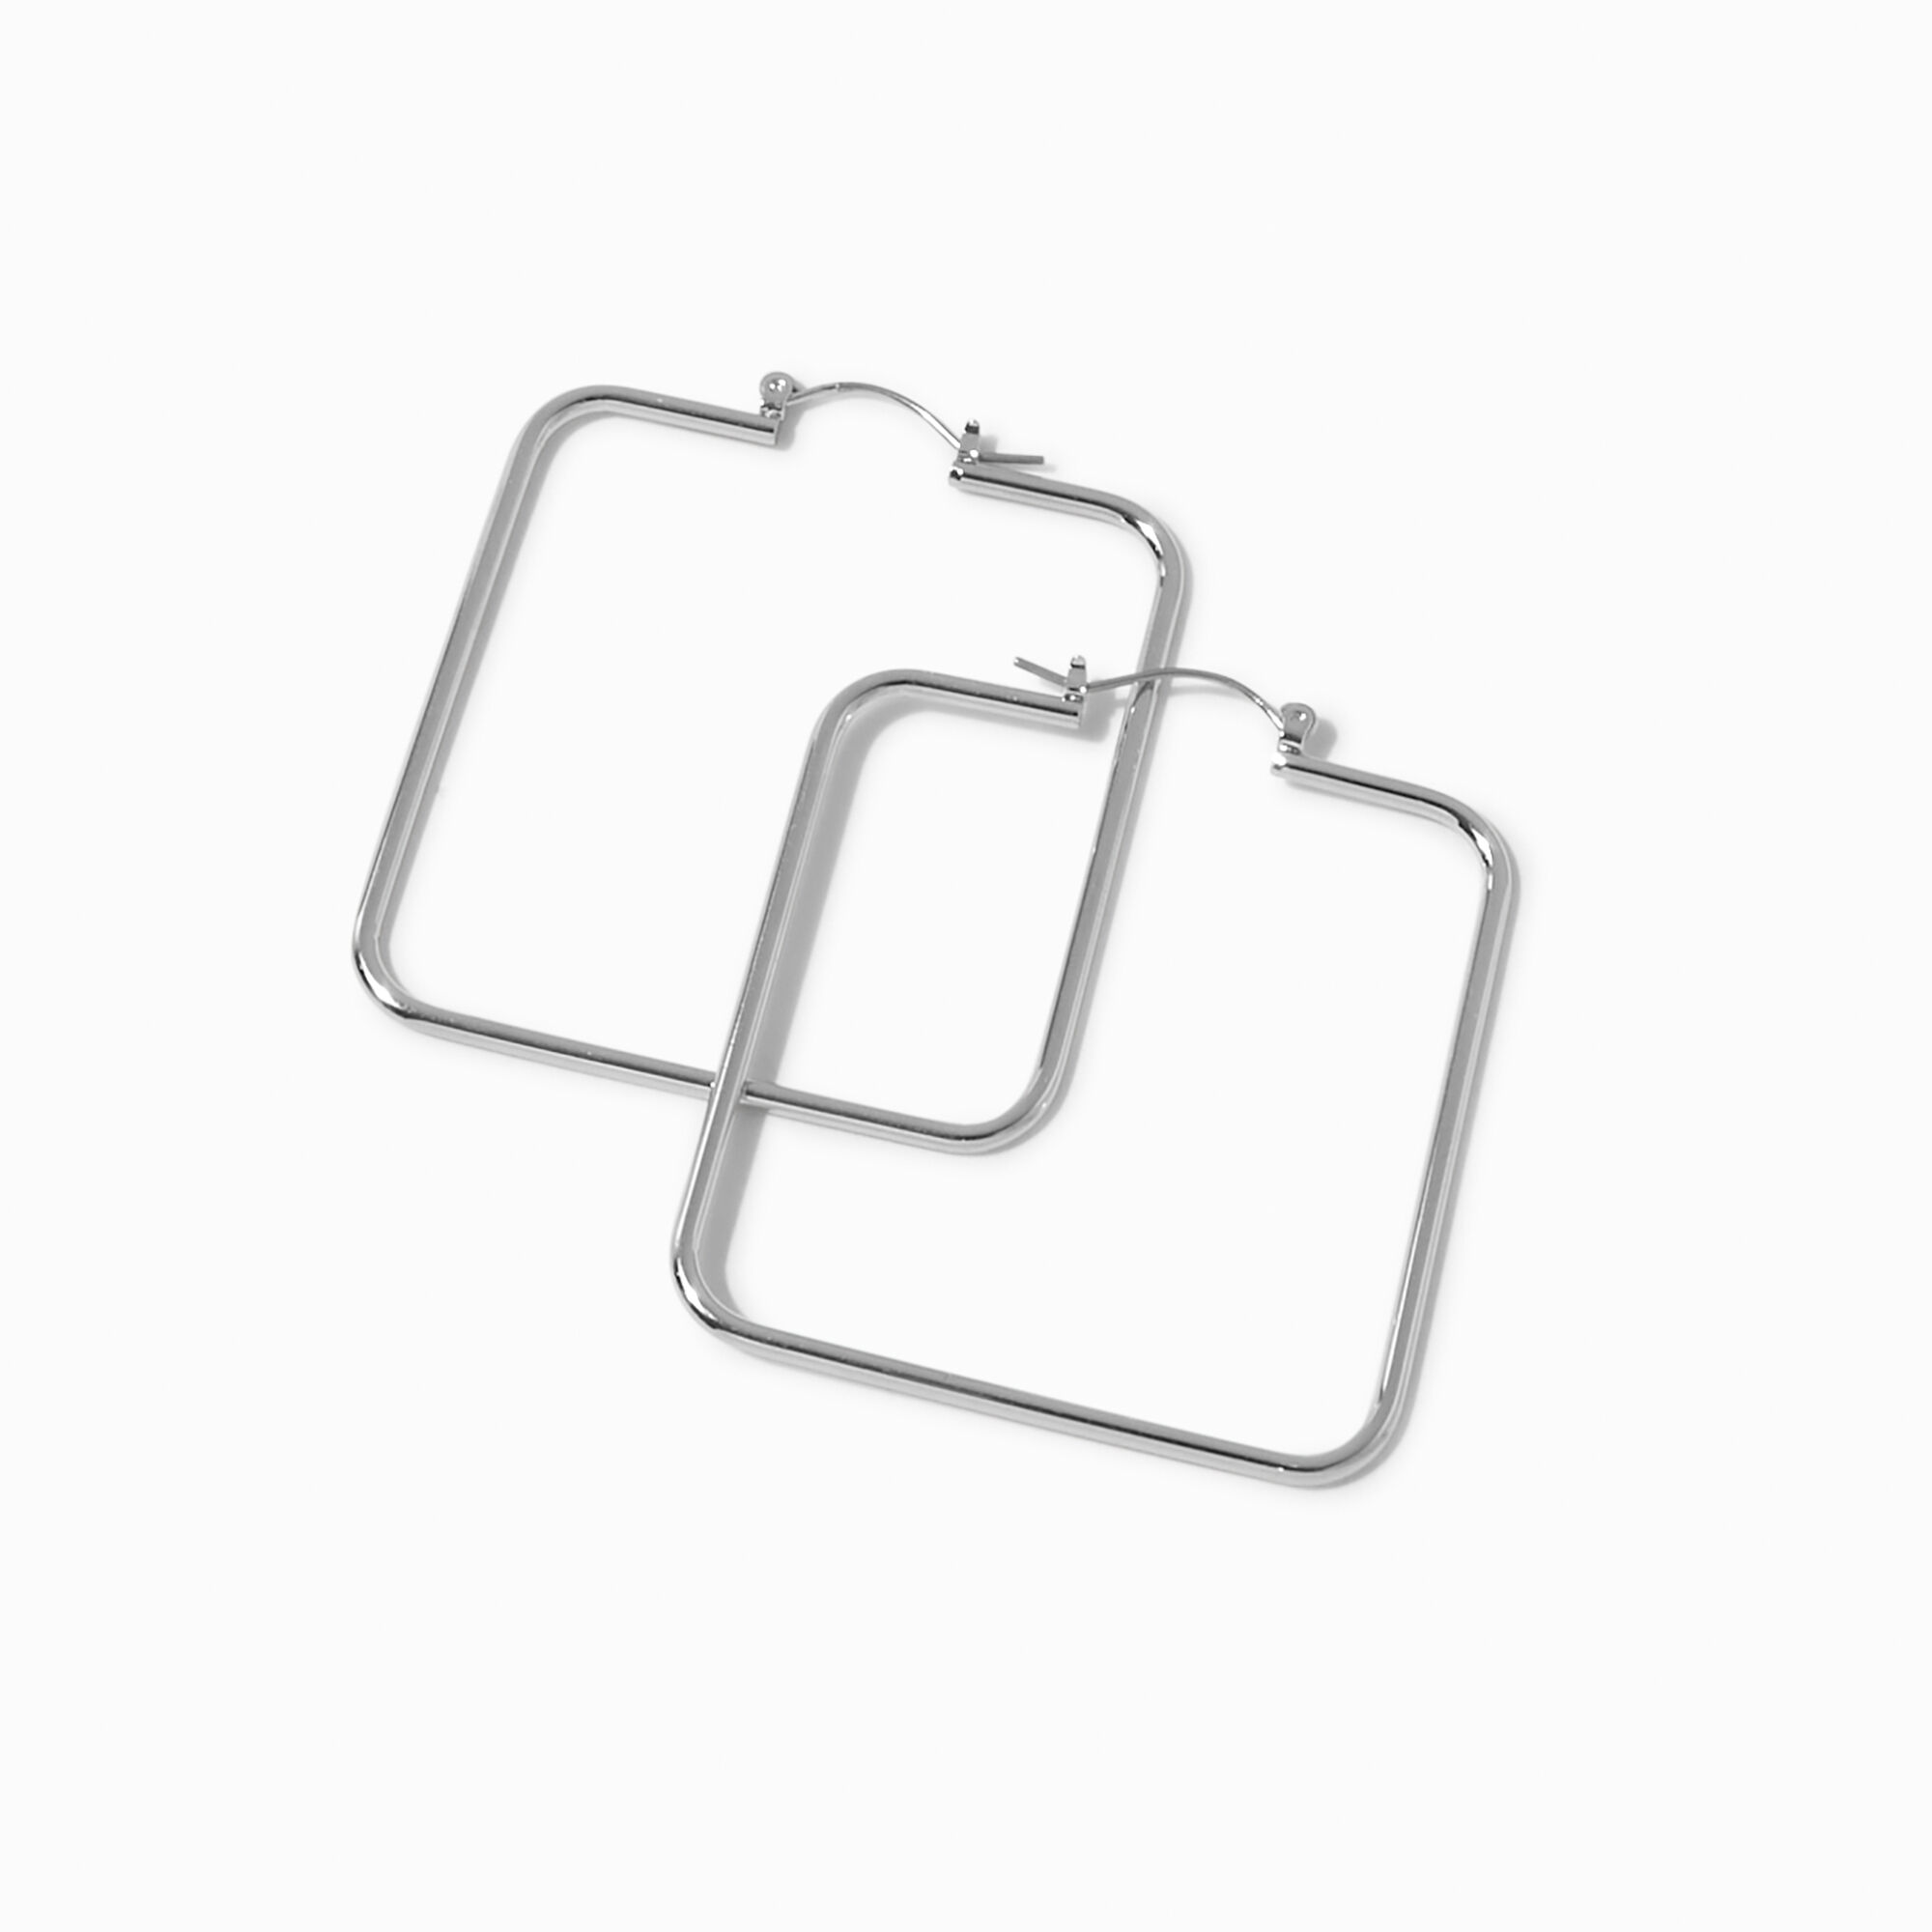 View Claires Tone Square 50MM Hoop Earrings Silver information